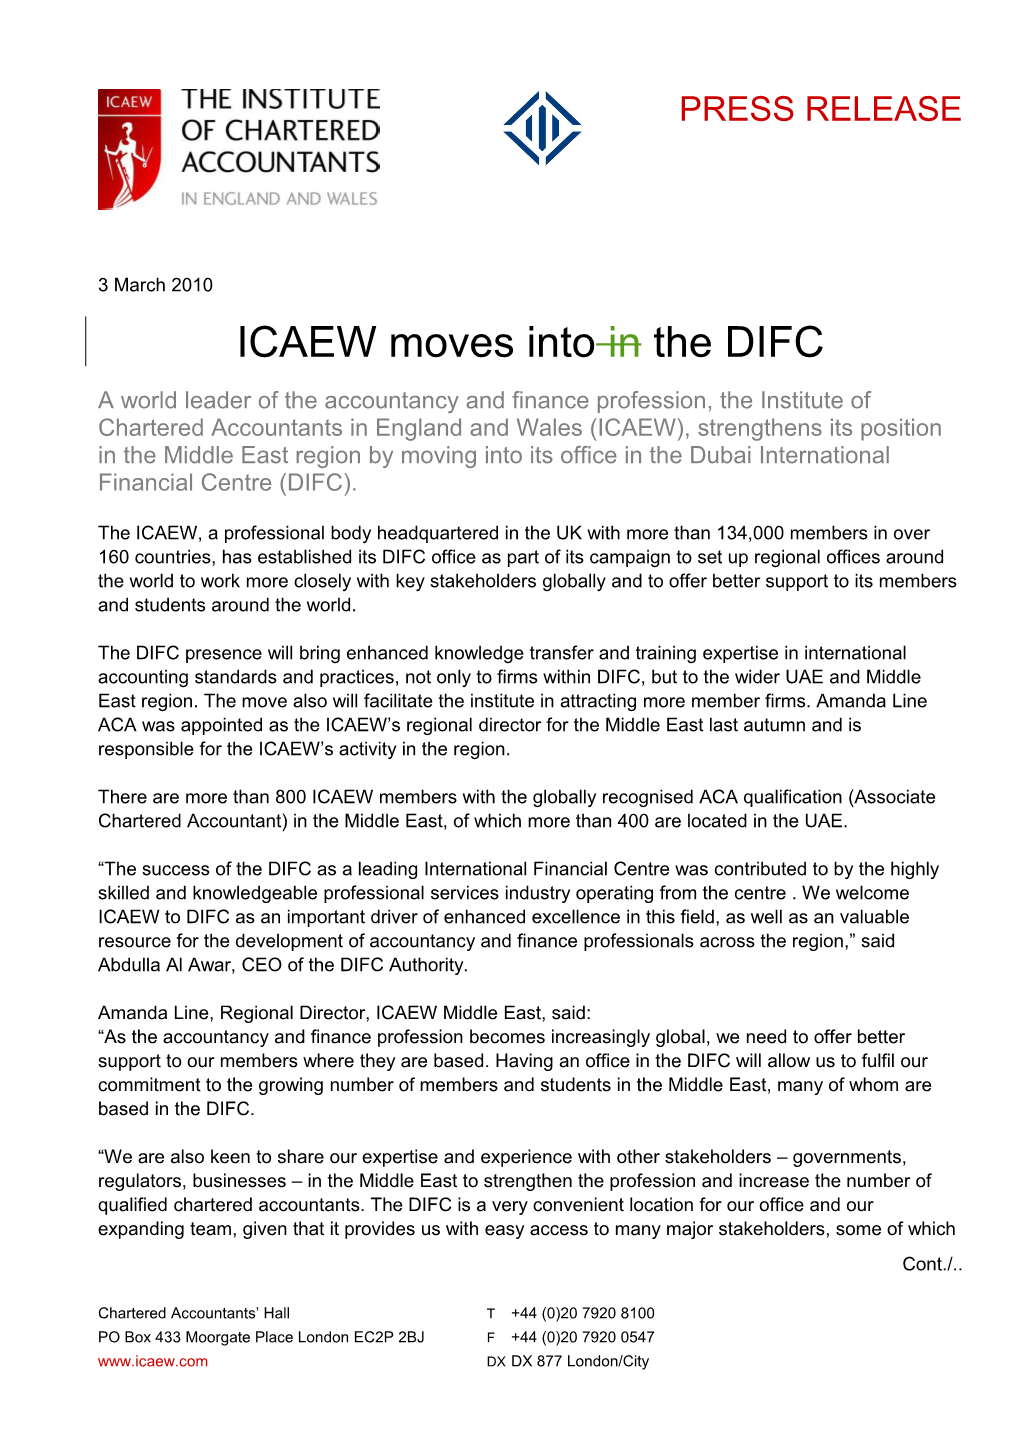 ICAEW Moves Into in the DIFC